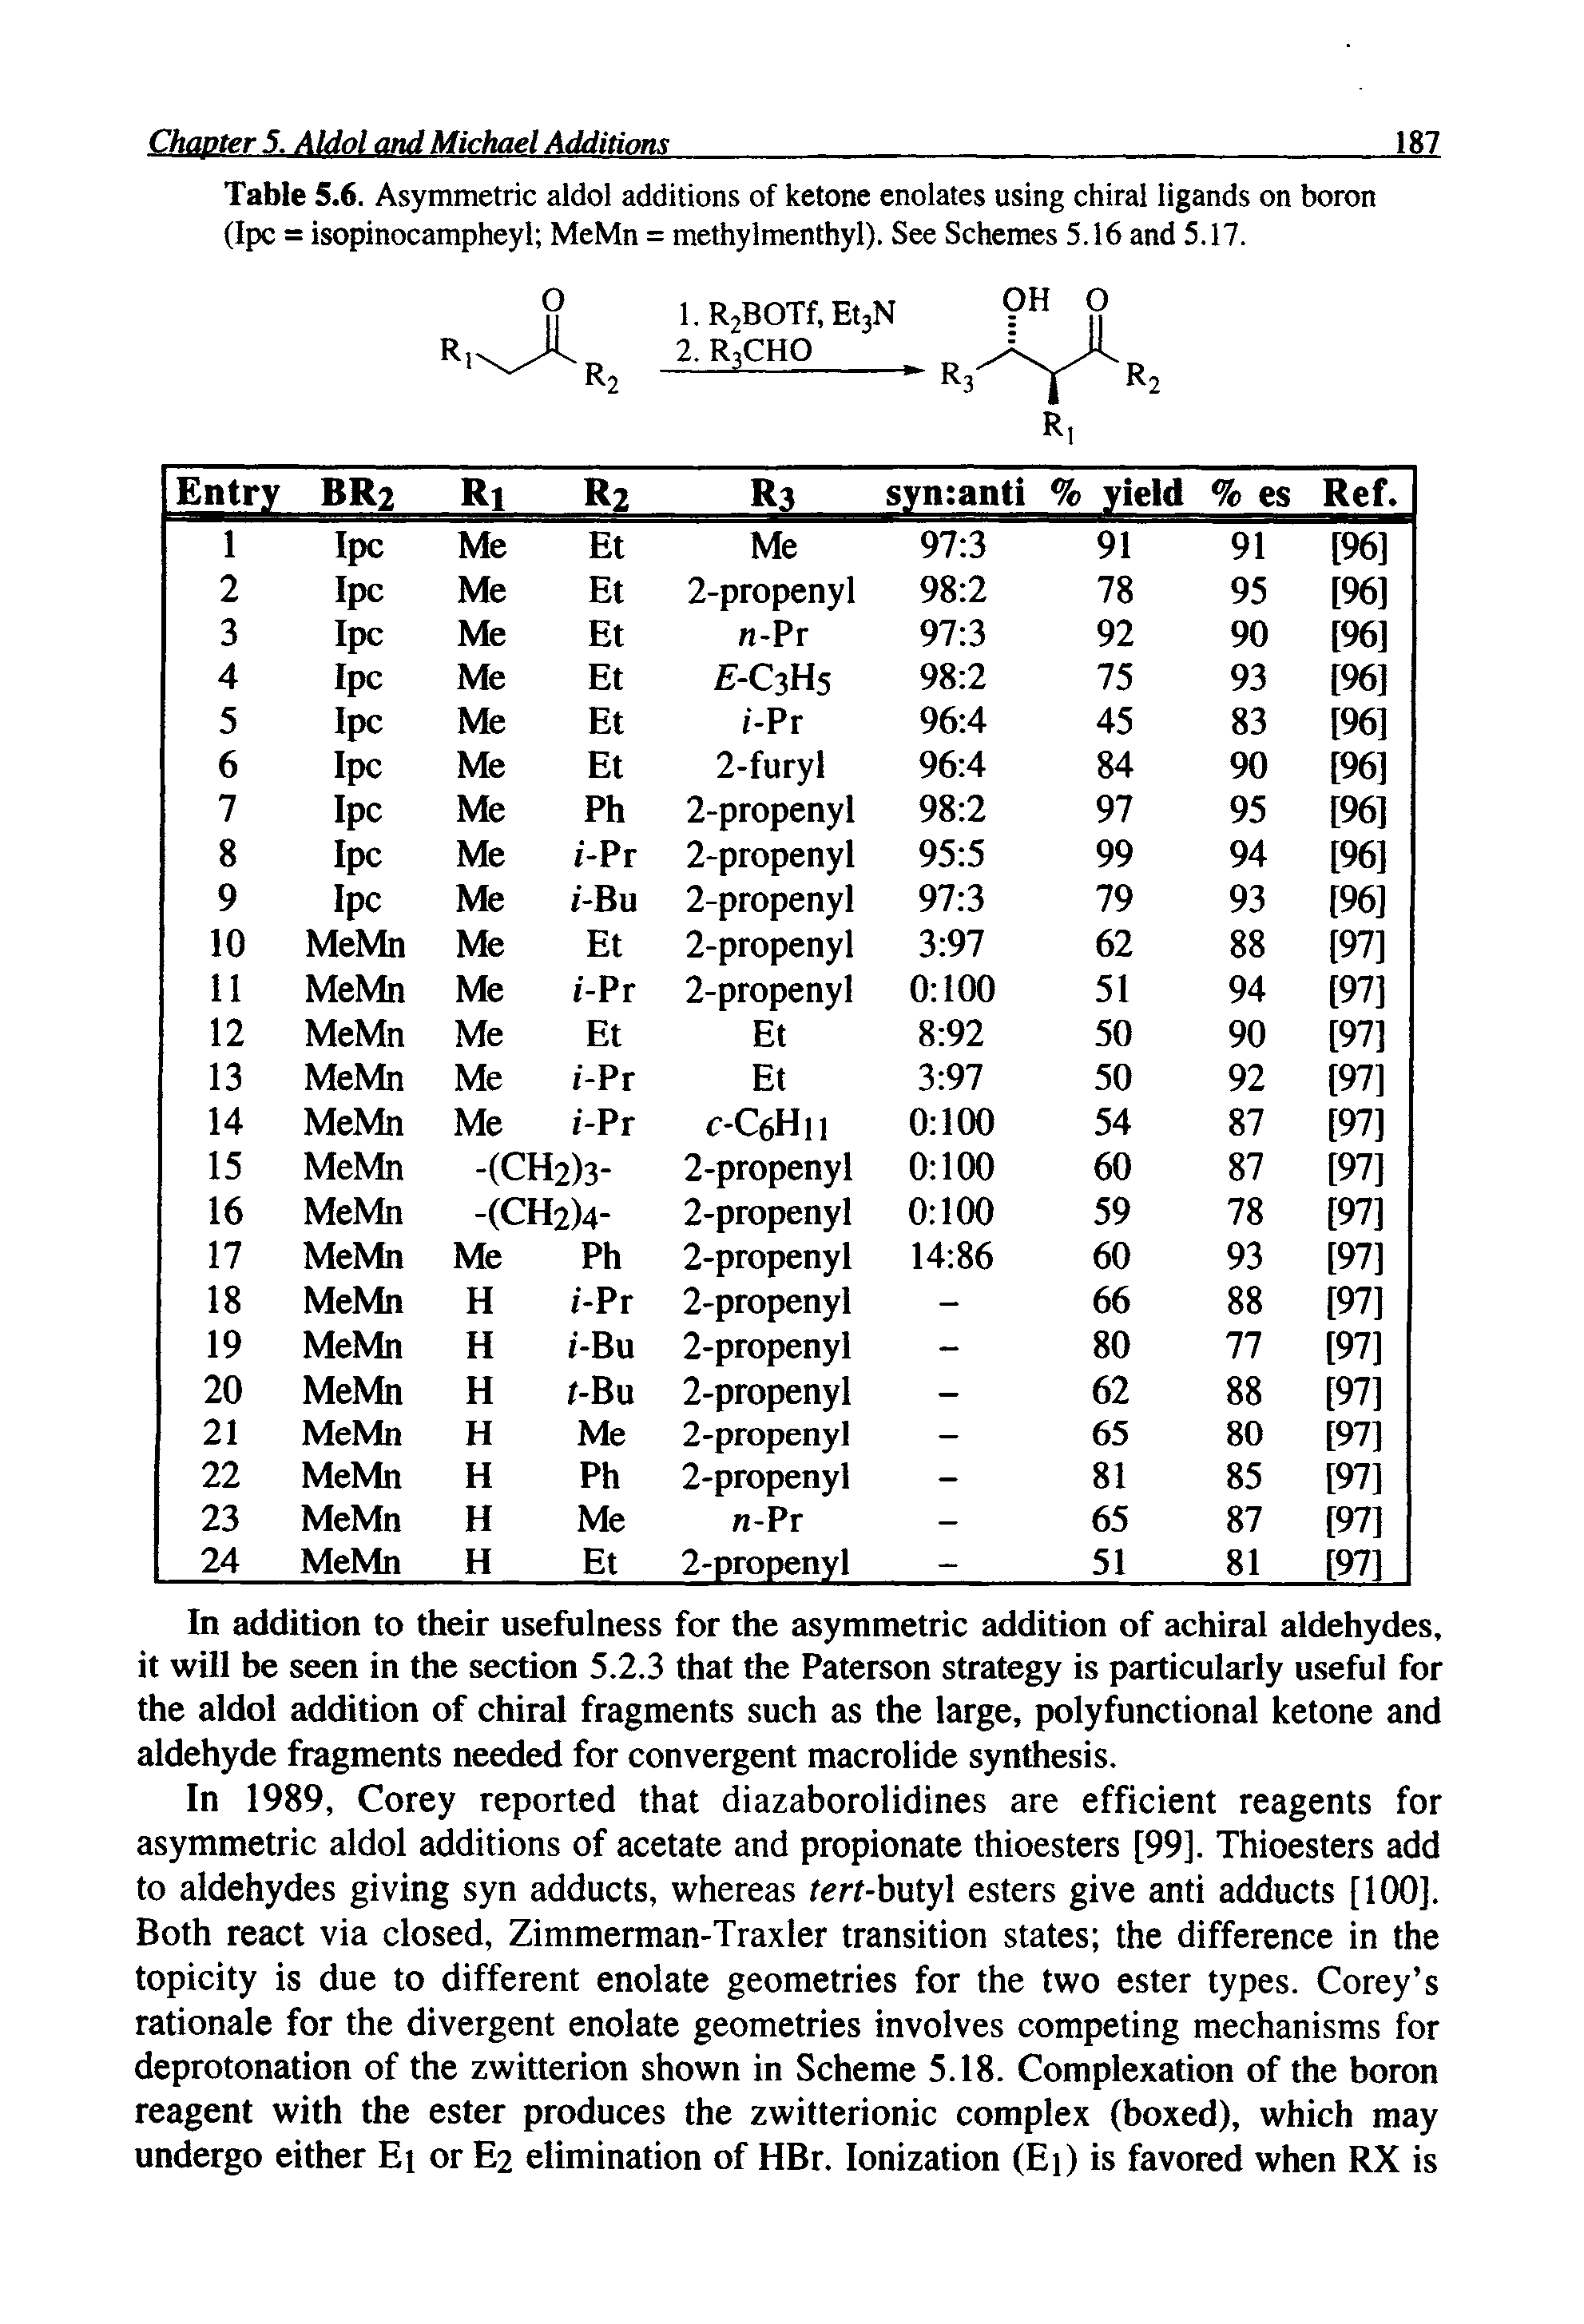 Table 5.6. Asymmetric aldol additions of ketone enolates using chiral ligands on boron (Ipc = isopinocampheyl MeMn = methylmenthyl). See Schemes 5.16 and 5.17.